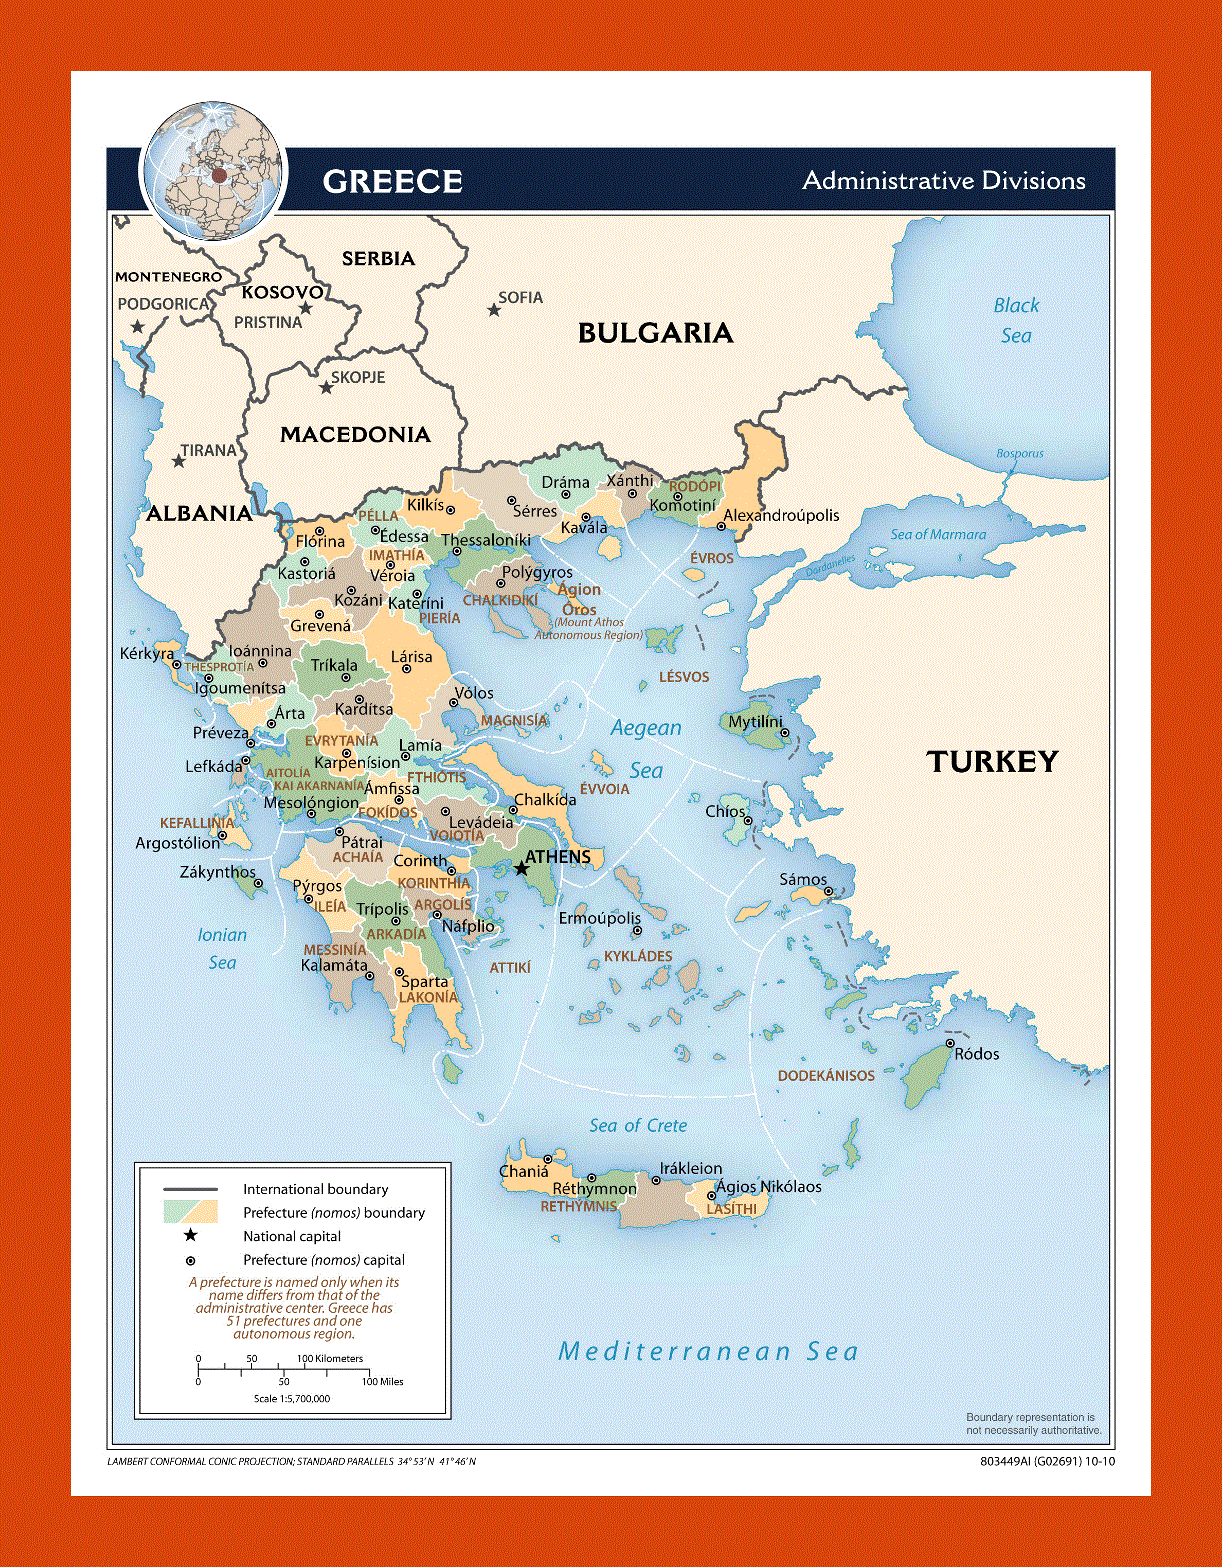 Administrative divisions map of Greece - 2010